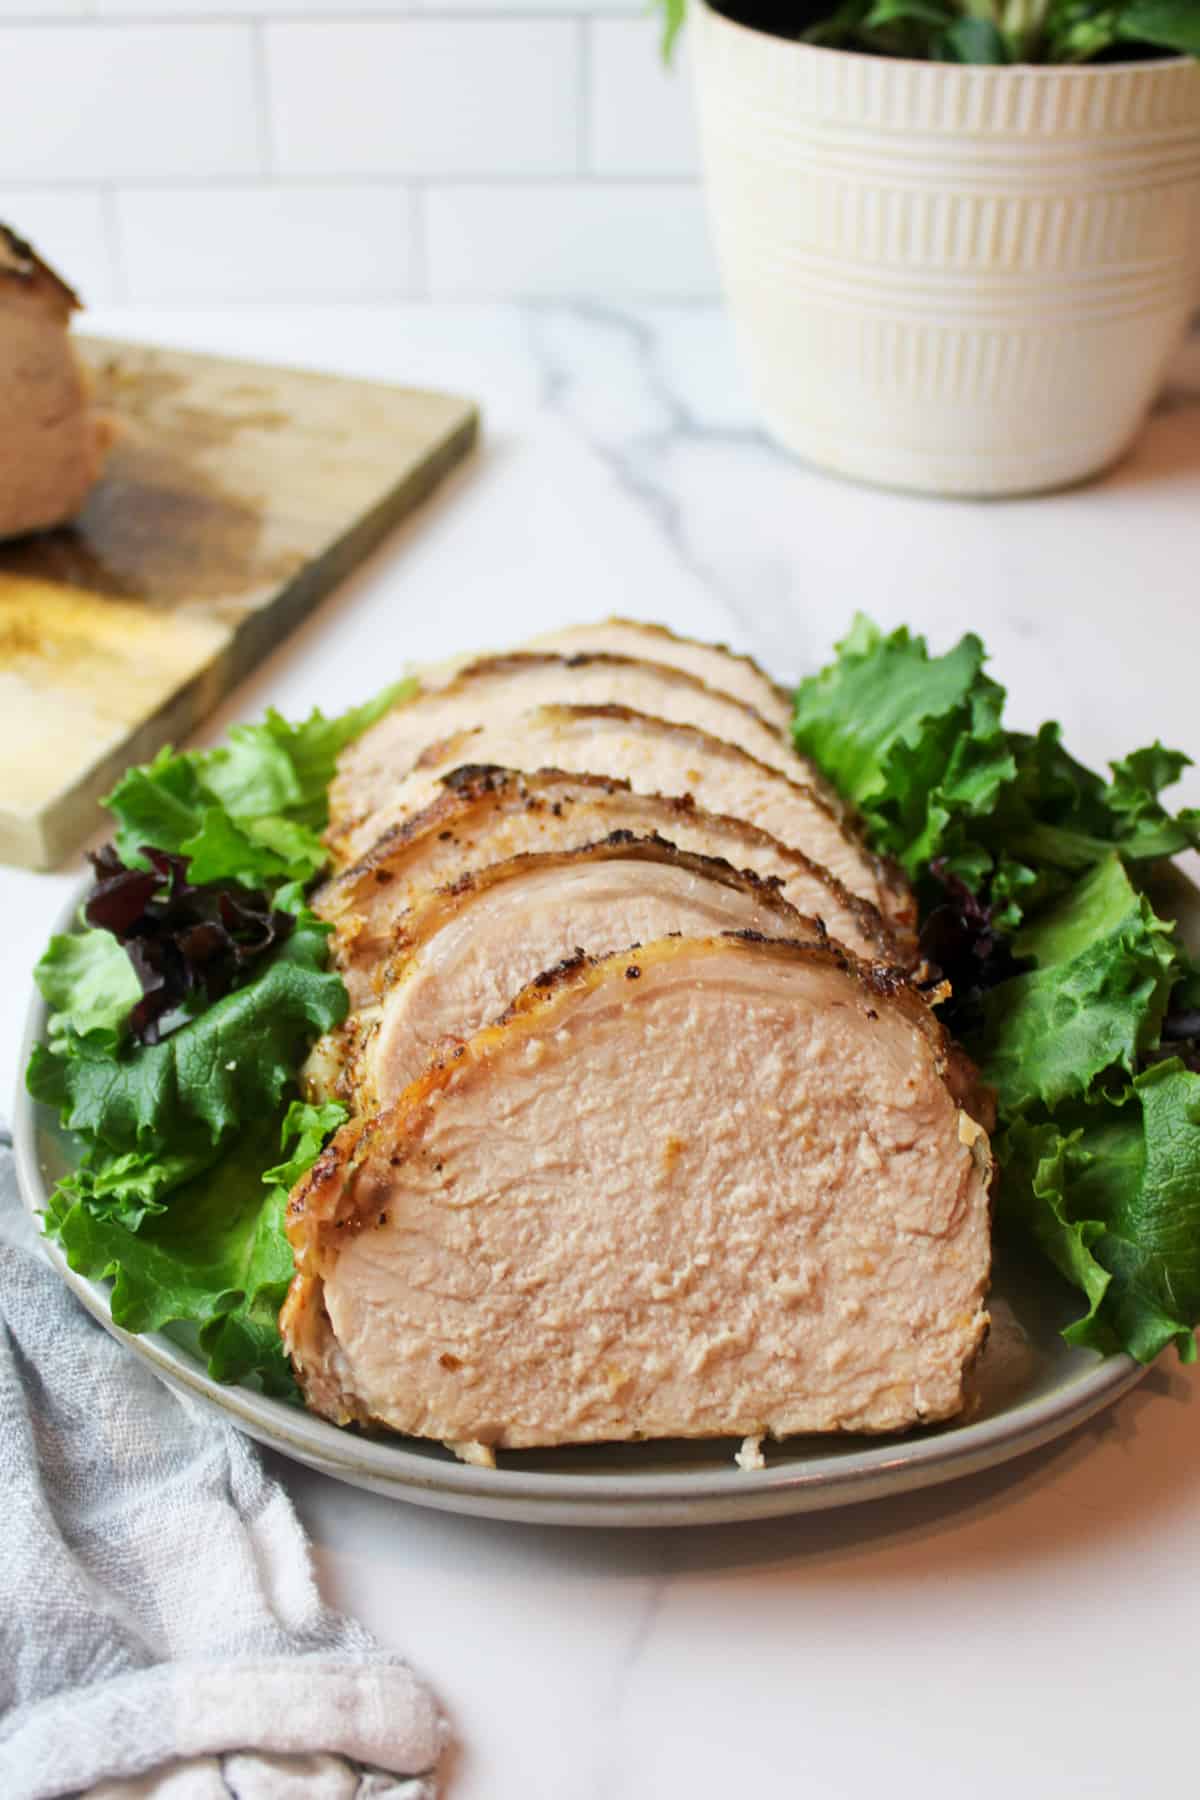 a sliced air fried pork loin on a plate with green leaf lettuce on the sides.